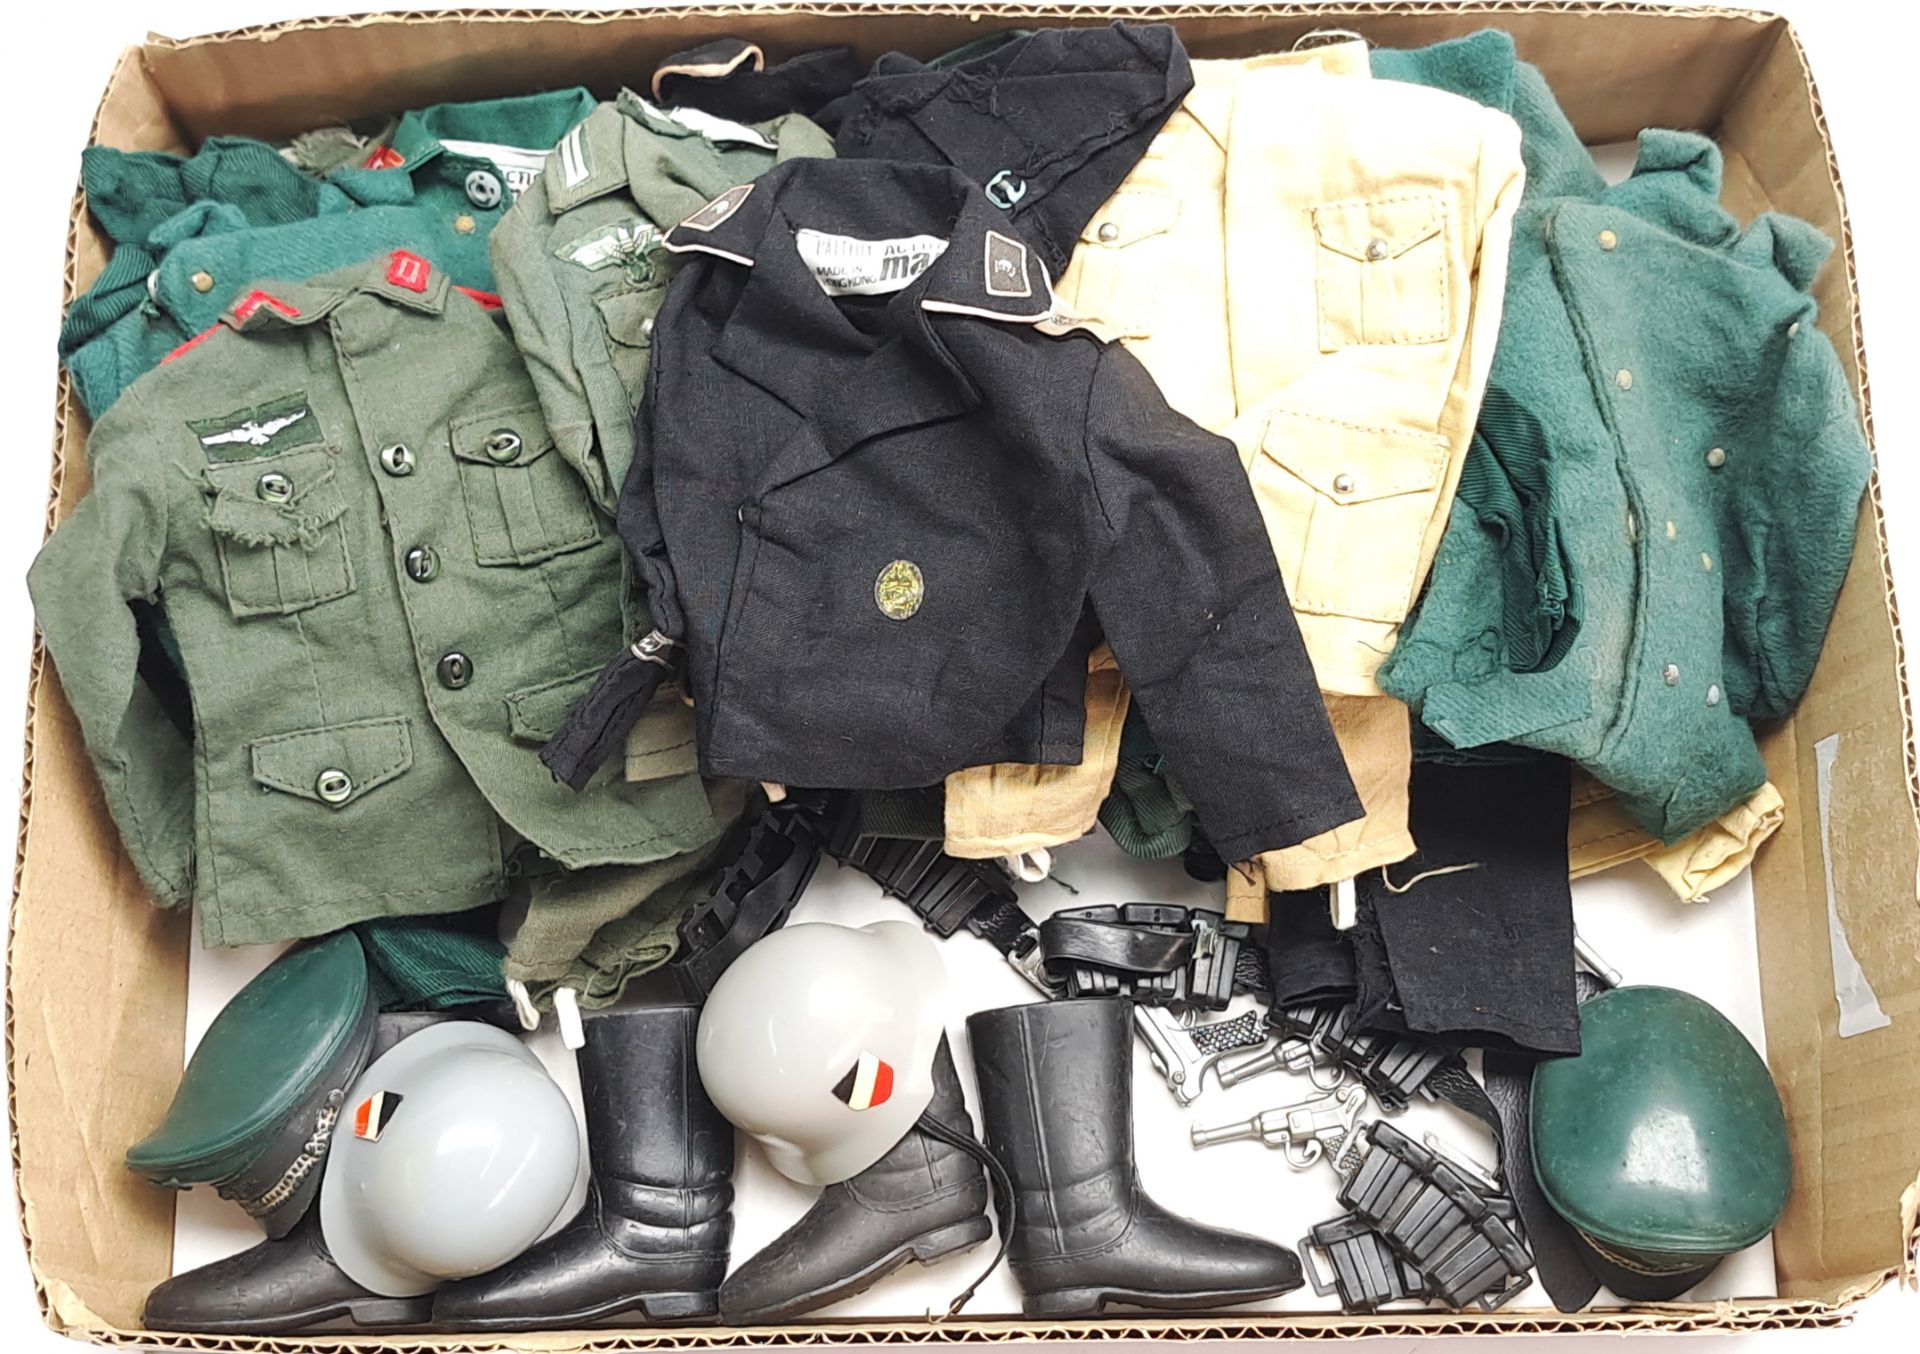 Palitoy Action Man vintage German forces related, loose clothing/accessories to include various p...